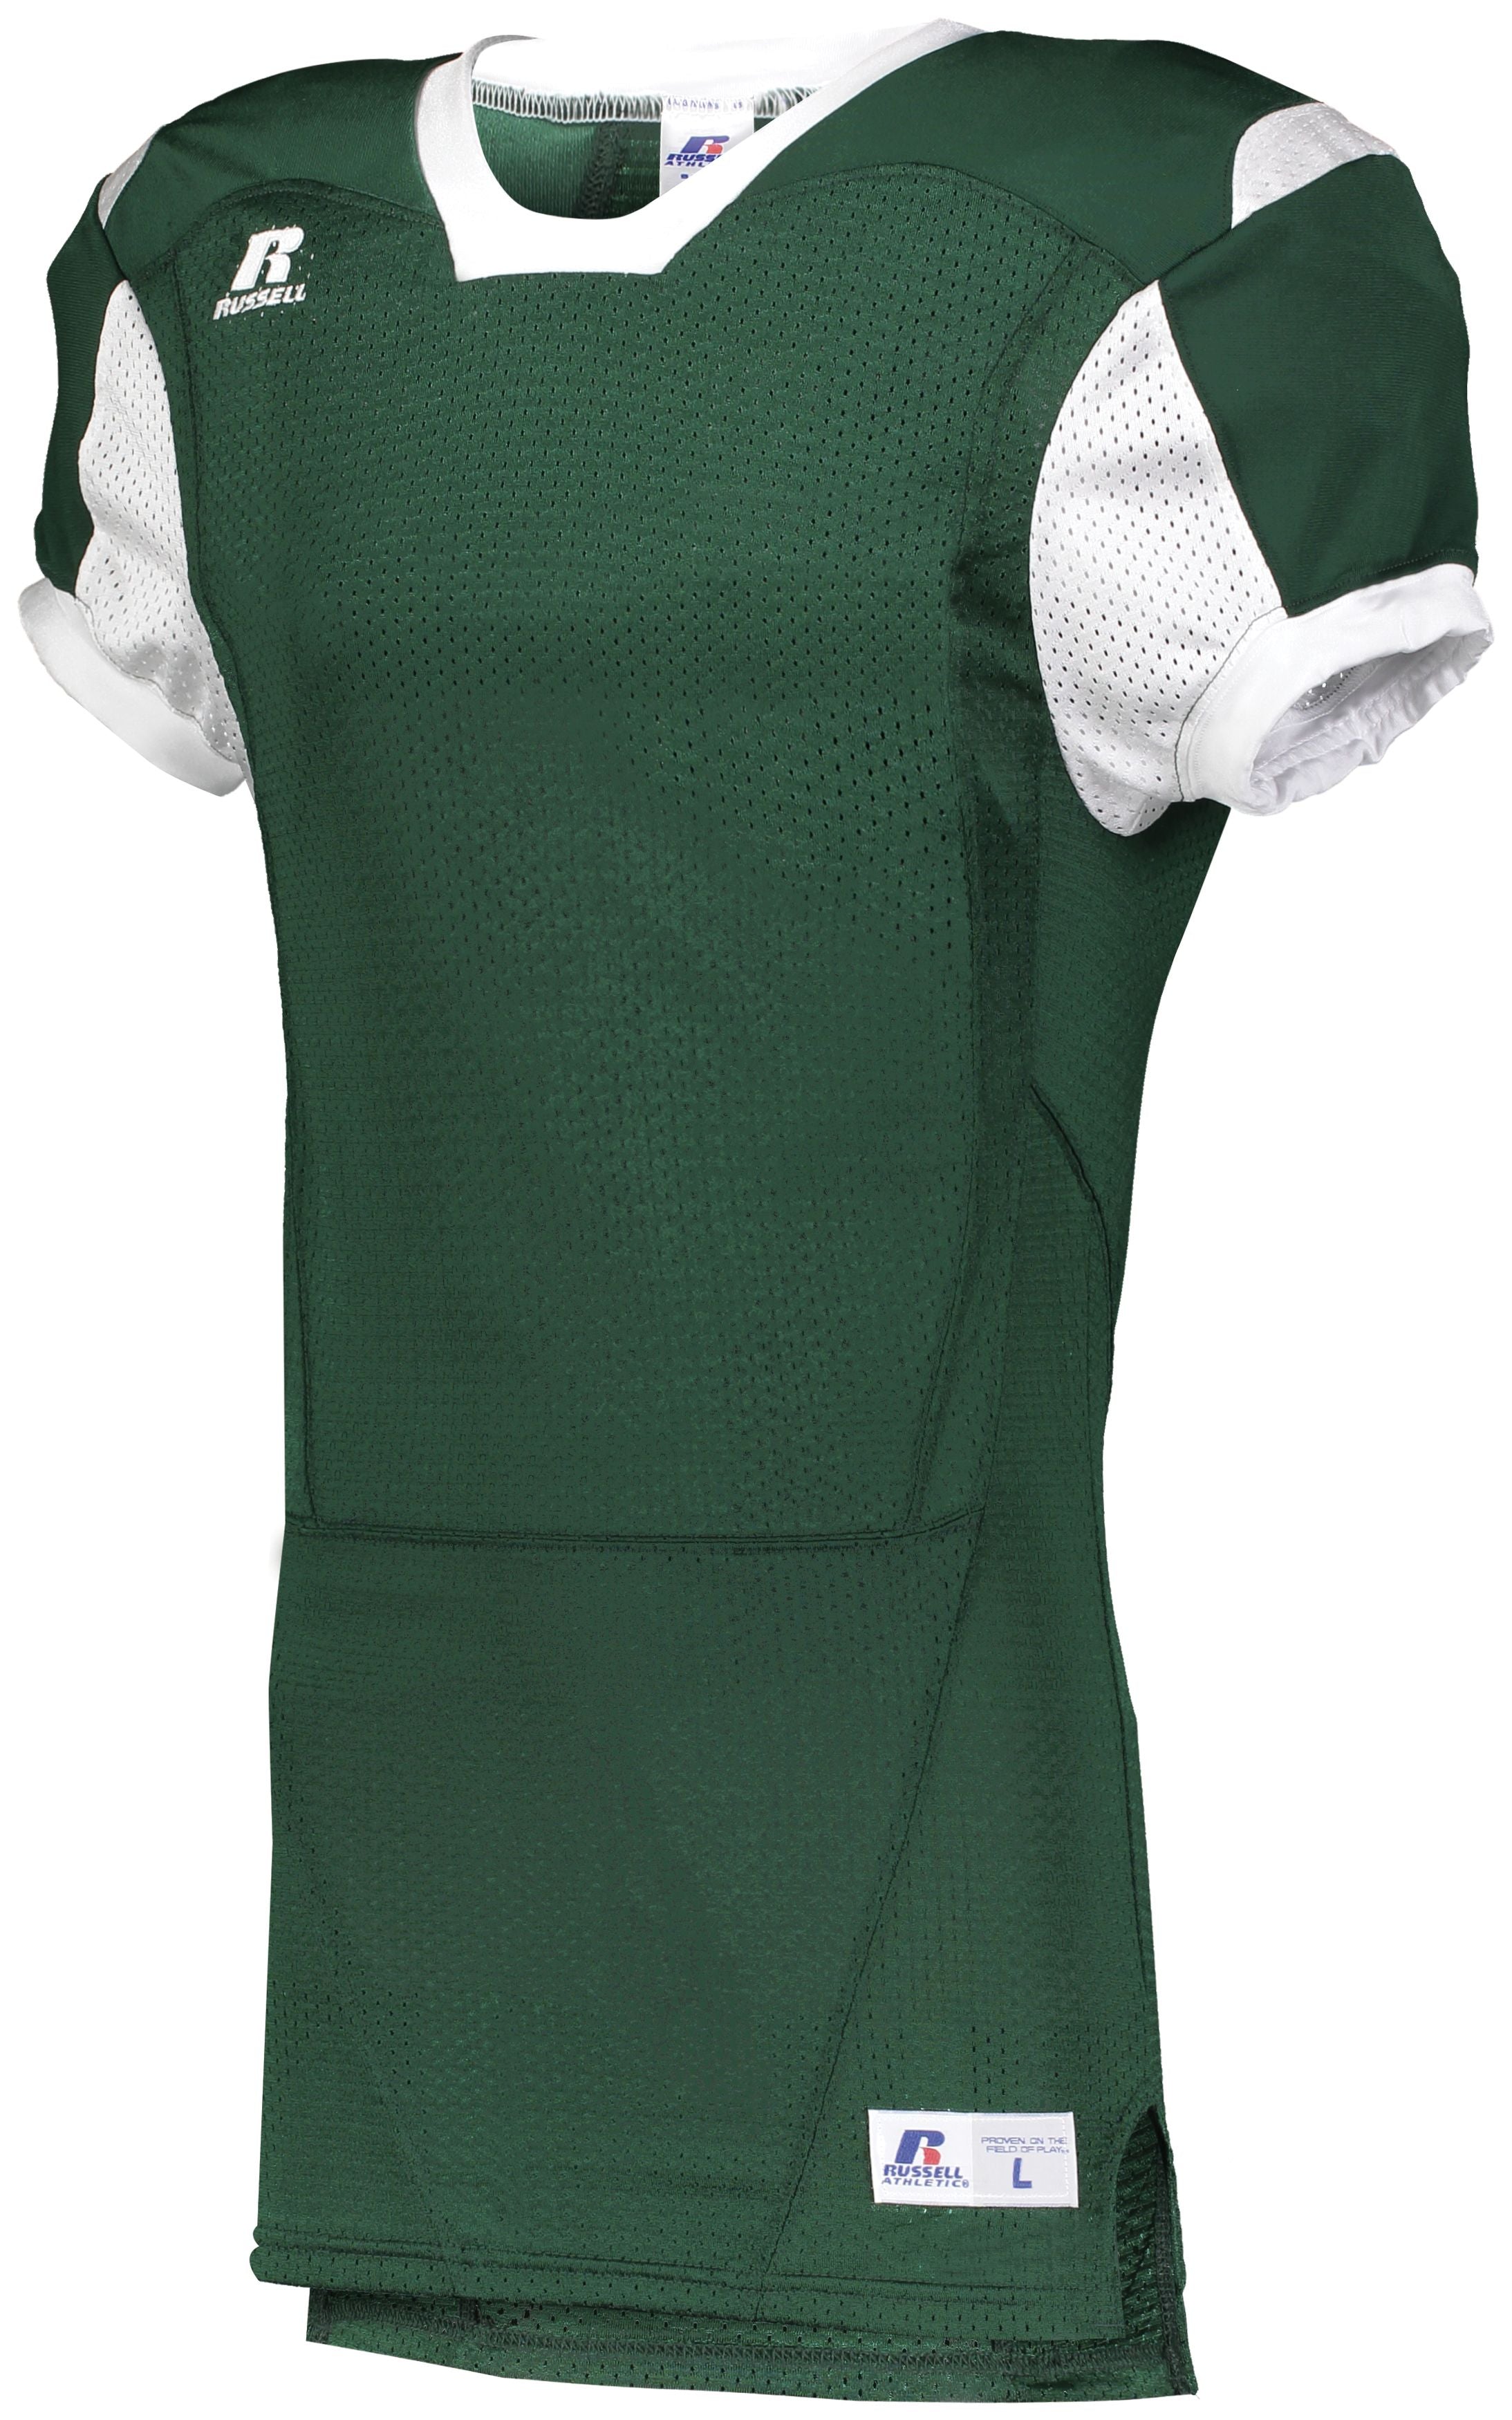 Russell Athletic Color Block Game Jersey in Dark Green/White  -Part of the Adult, Adult-Jersey, Football, Russell-Athletic-Products, Shirts, All-Sports, All-Sports-1 product lines at KanaleyCreations.com